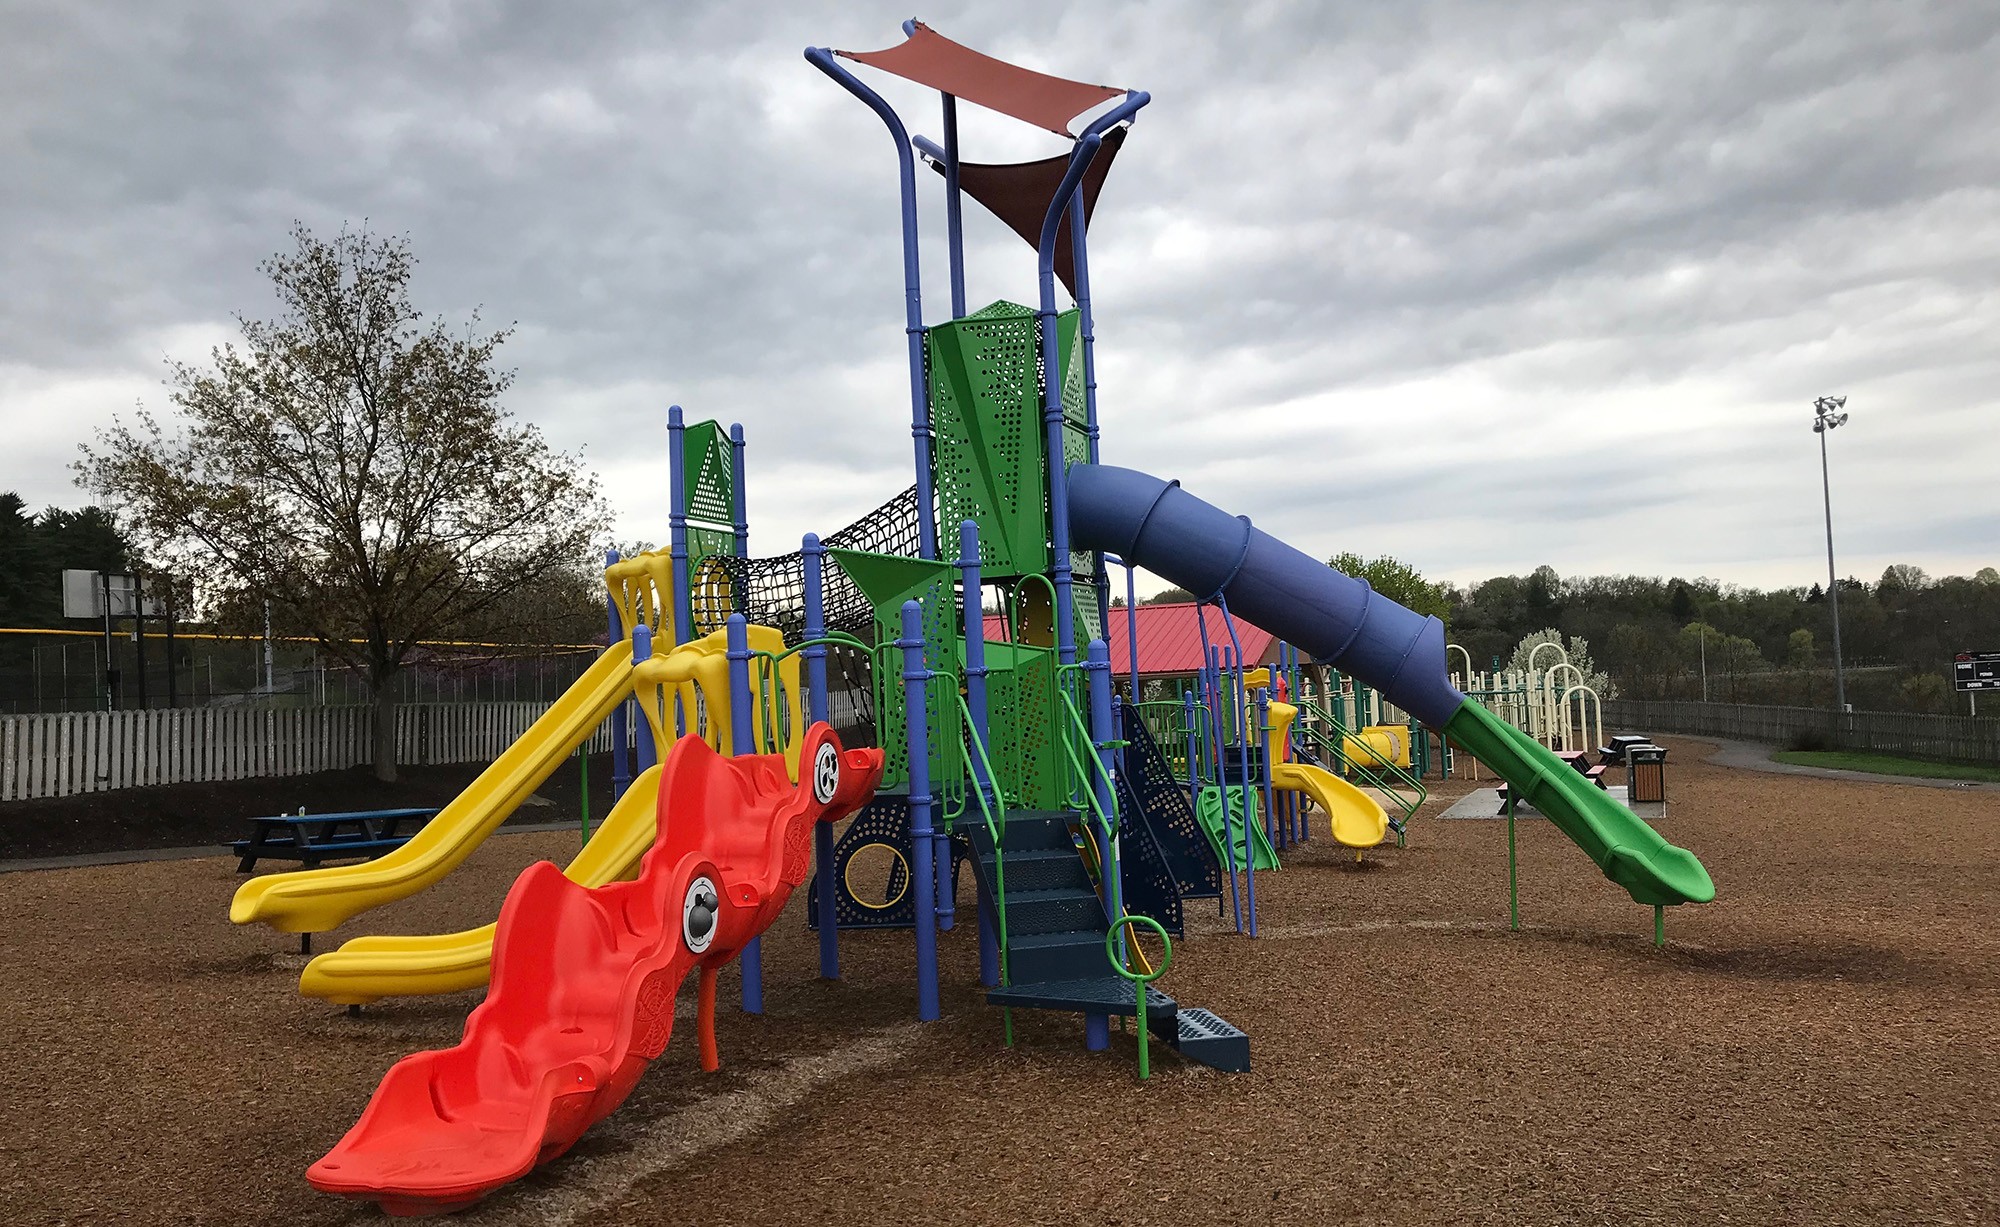 Featured image of colorful playground park with three slides during cloudy day